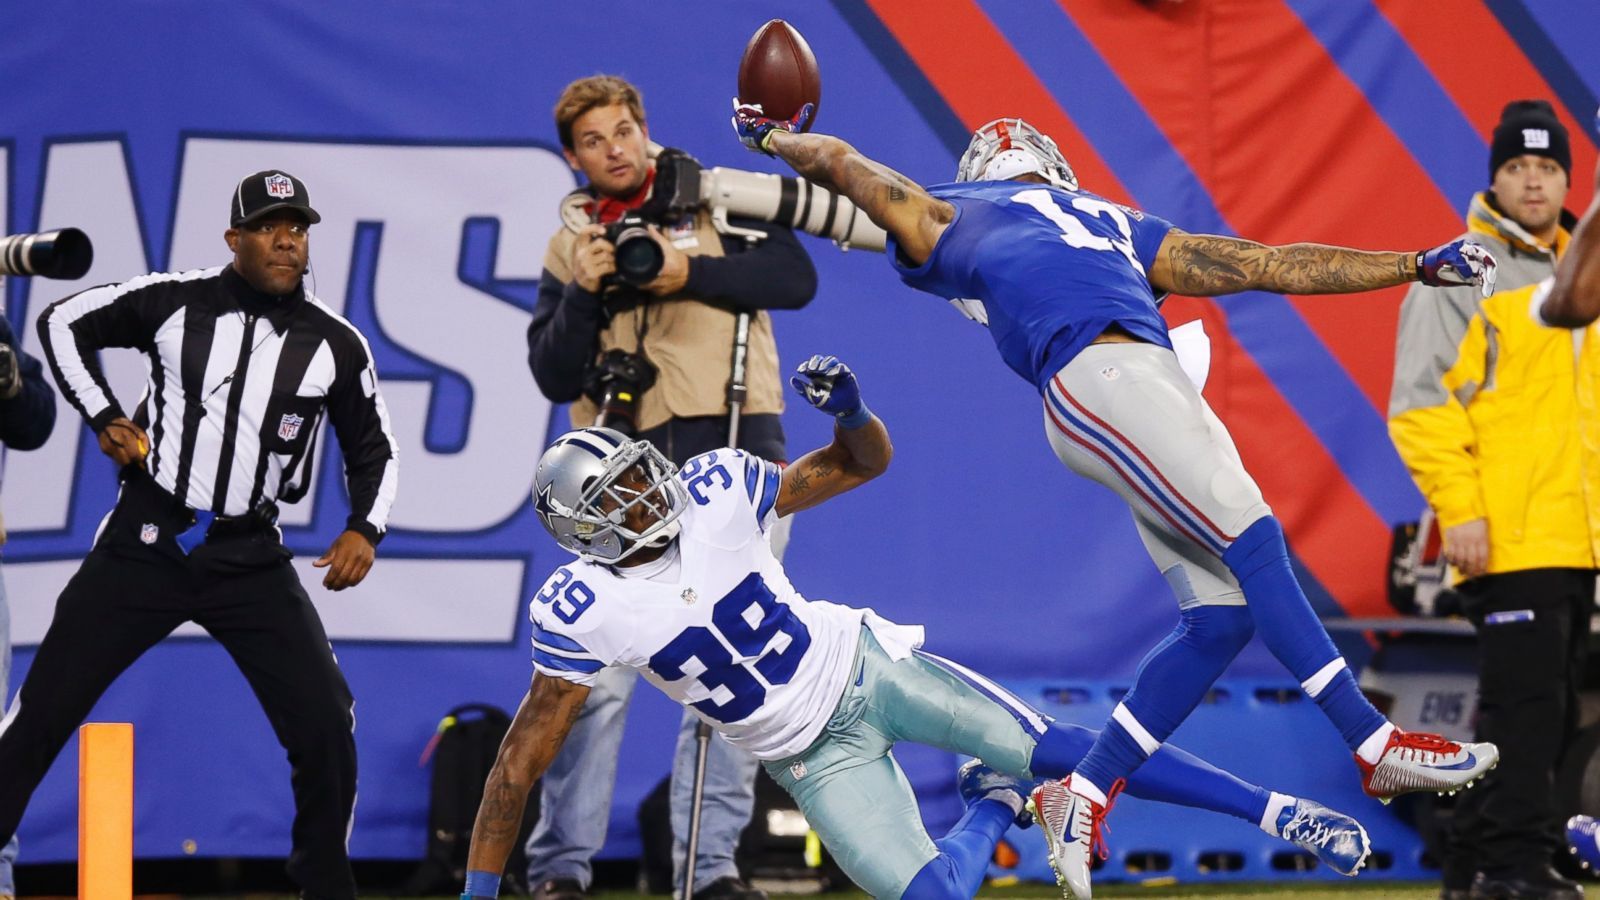 Odell Beckham Jr. Made One of the Greatest Football Catches Ever